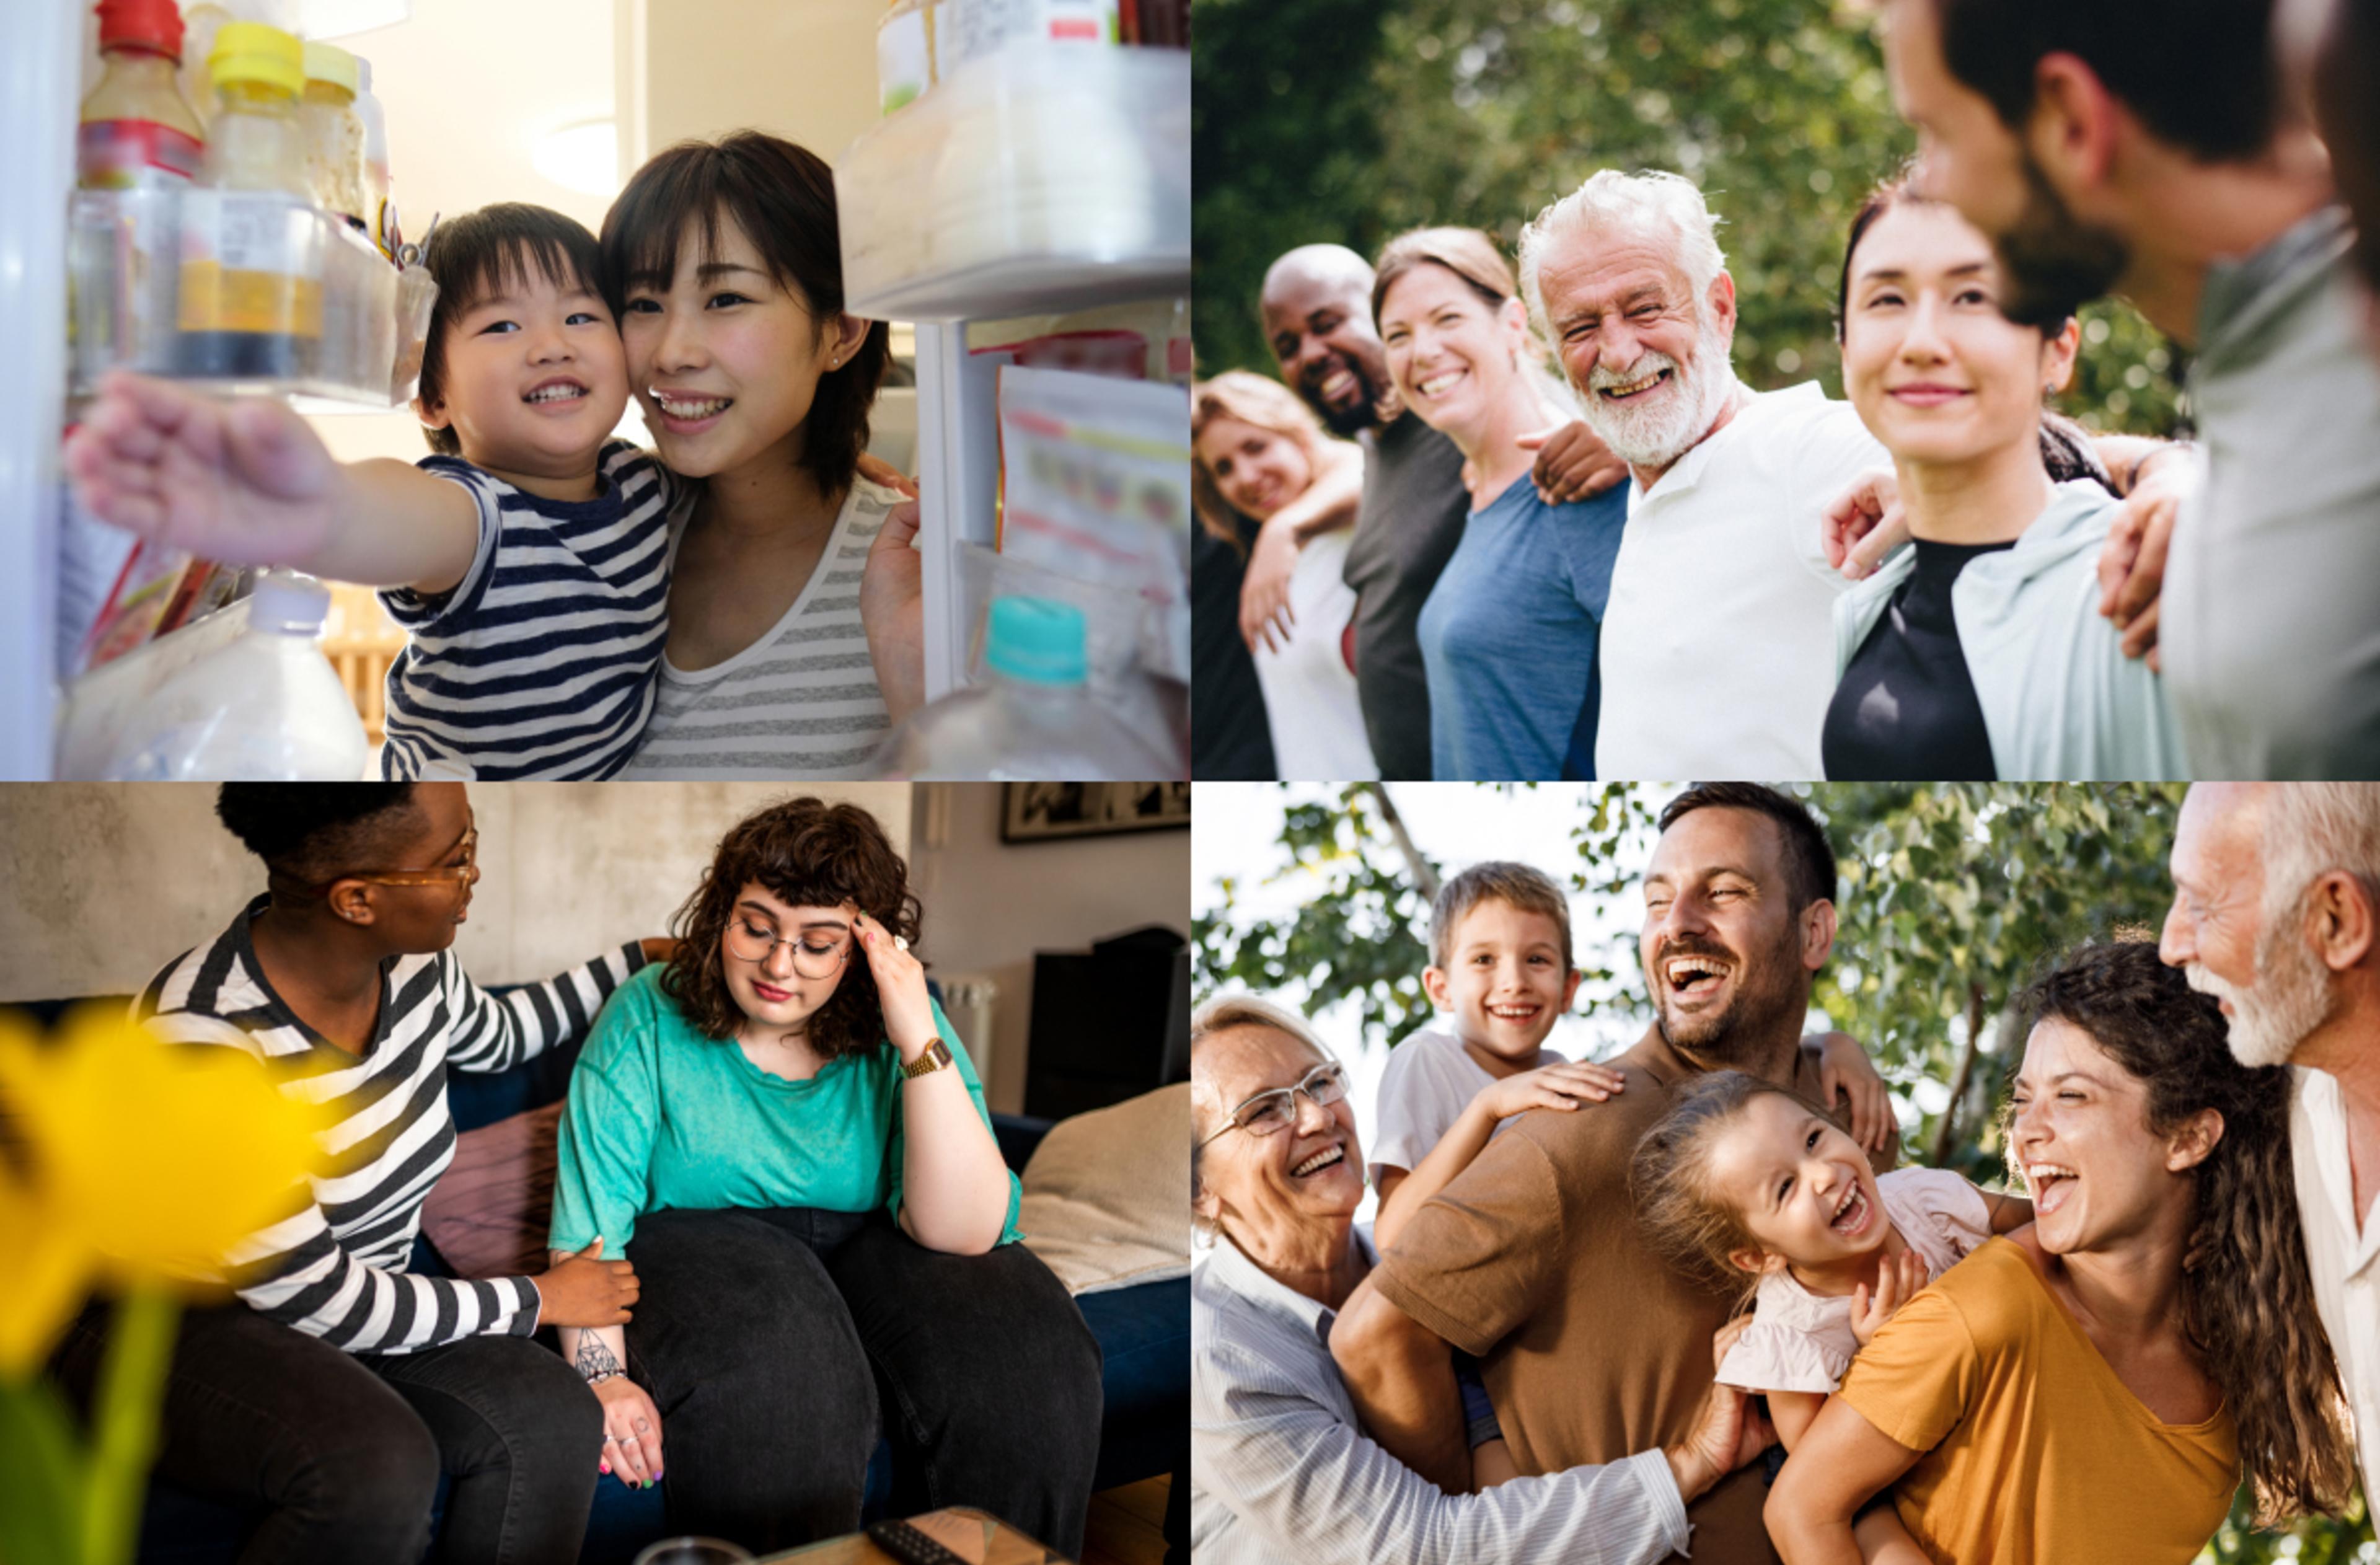 4 photos the depict United Ways 4 areas of focus which include Socio-economic Well-Being; Social Inclusion; Mental Health; and Healthy Relationships.